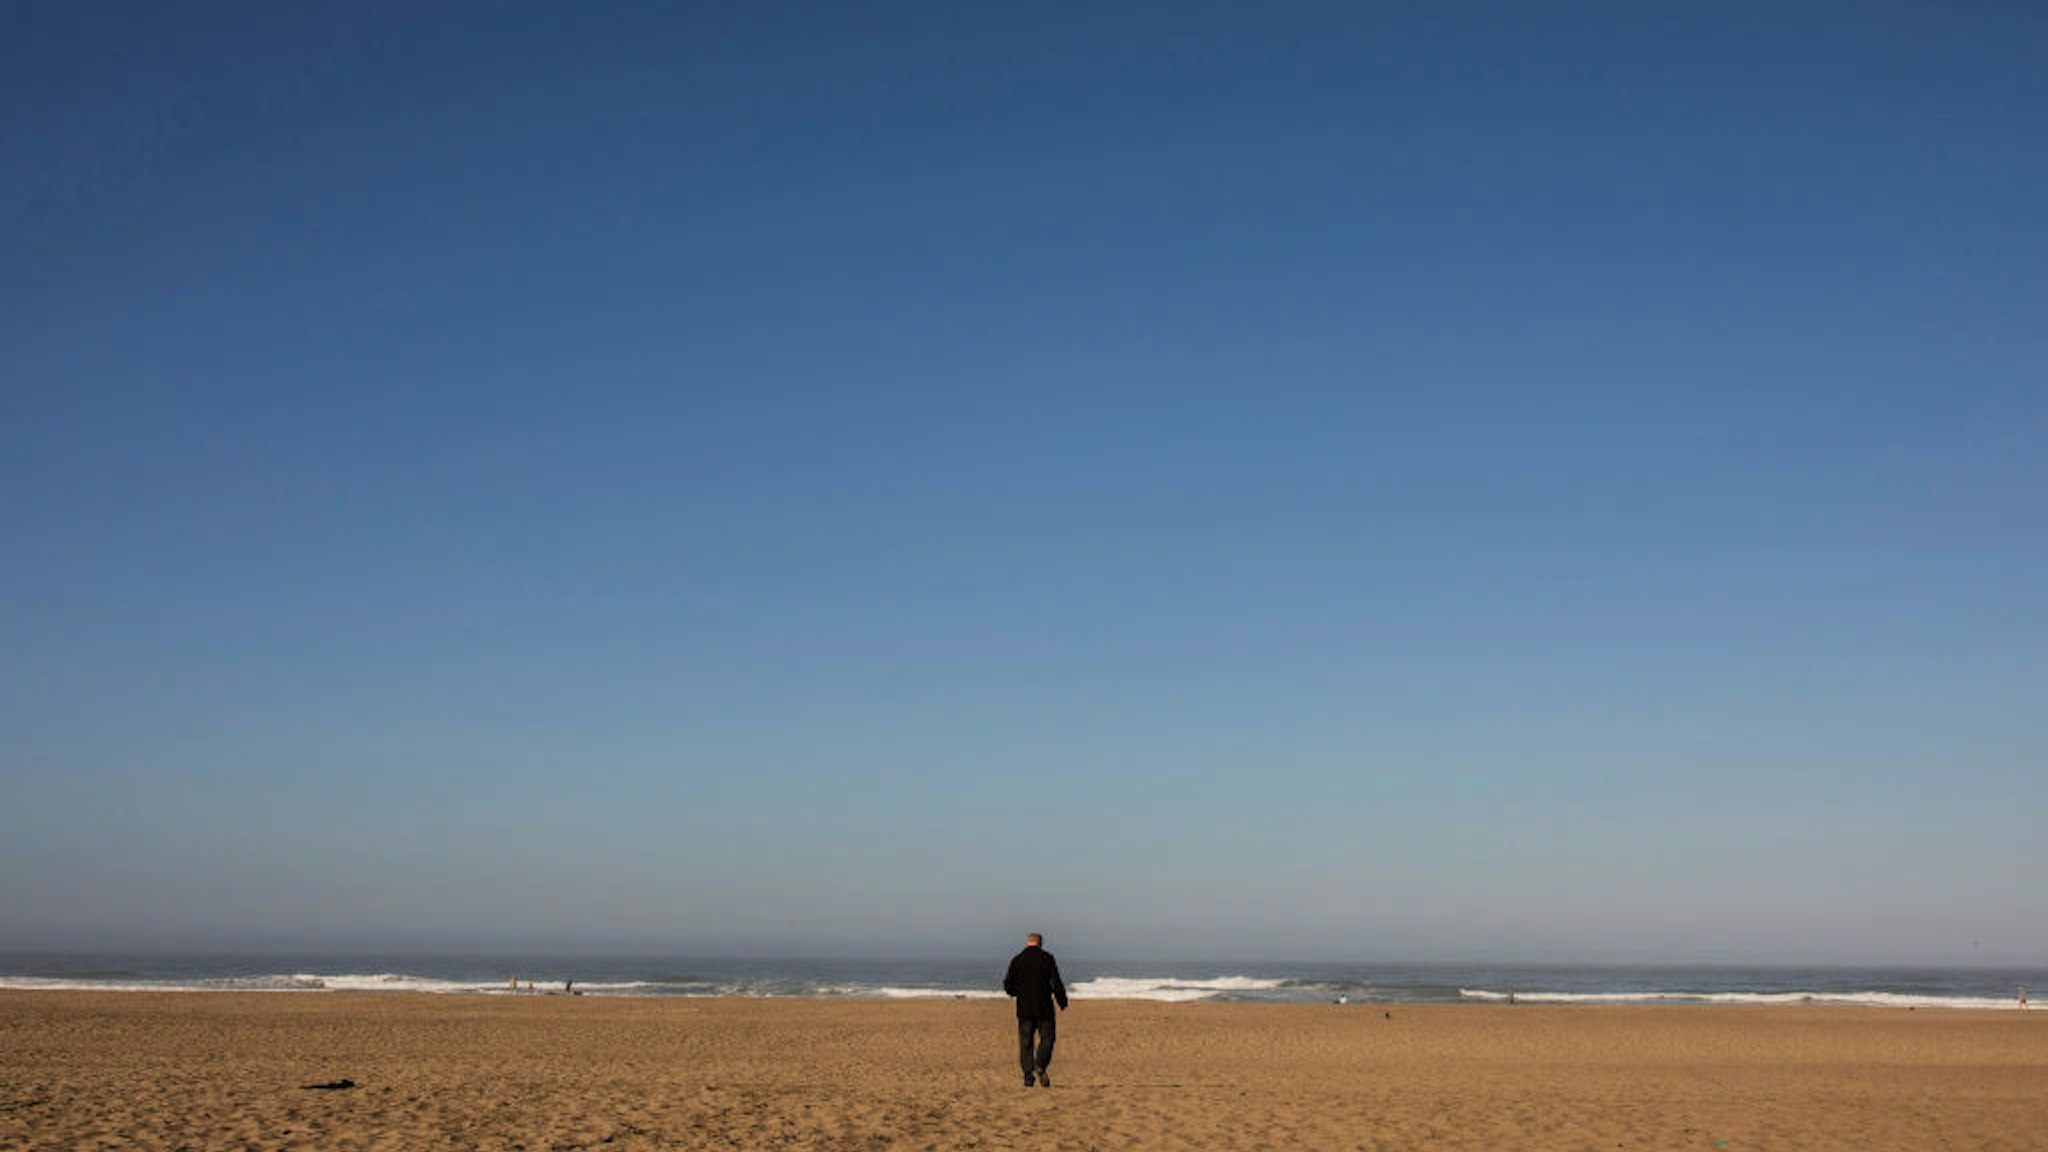 Police inspector Dan Cunningham counts his steps to find the approximate location of a crime scene at Ocean Beach, Tuesday, Oct. 13, 2020, in San Francisco, Calif.